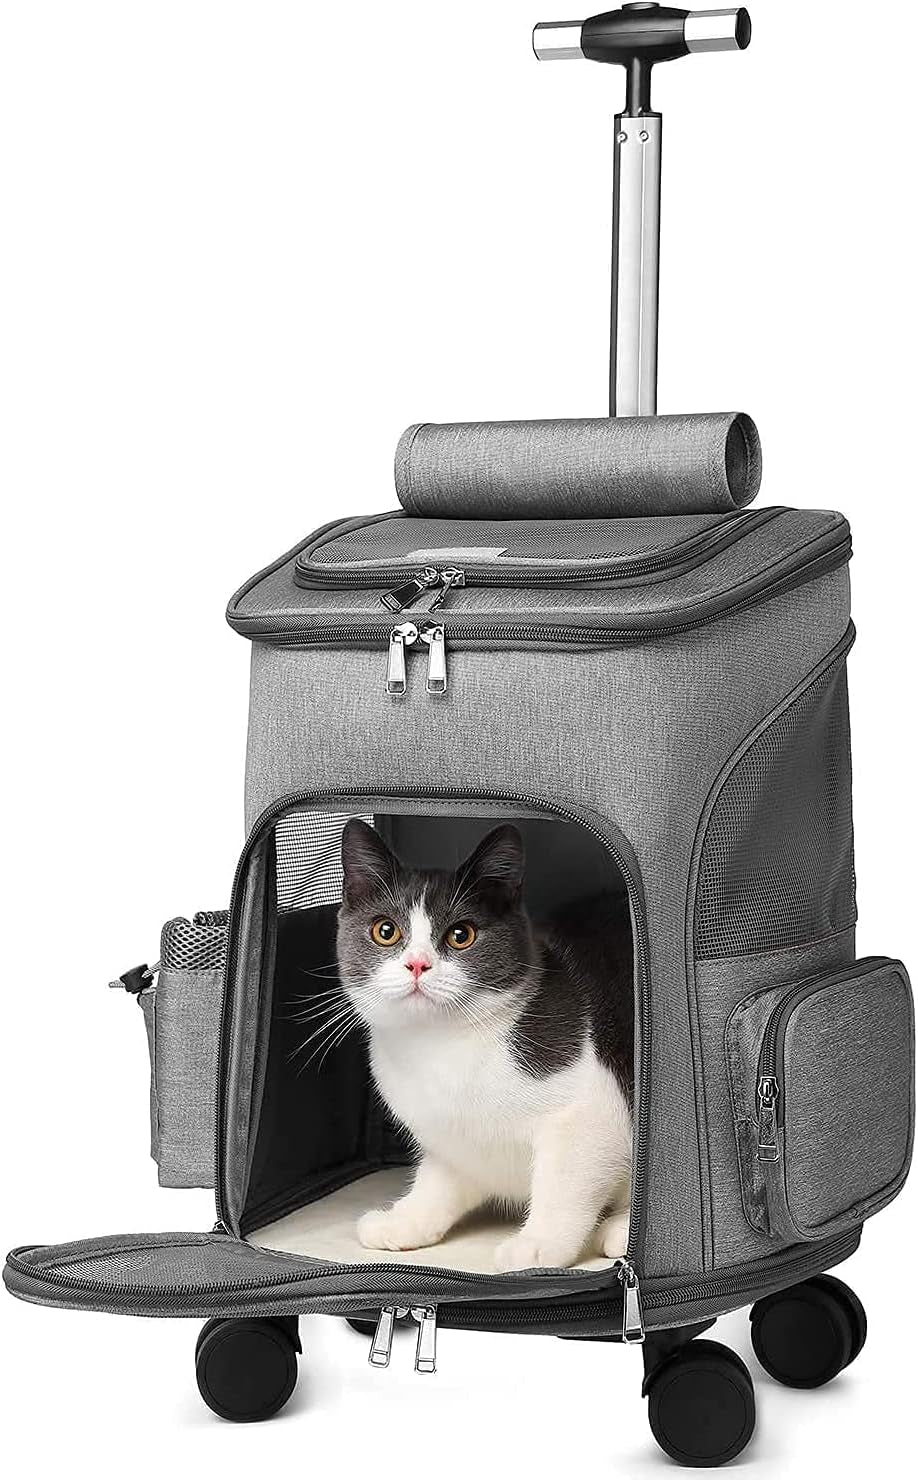 Airline Approved Pet Carrier Backpack with Wheels(Large Space),Rolling Backpack with Durable Handle and Flexible Wheels,Breathable Durable Mesh Panels(Most Airplane Approved)